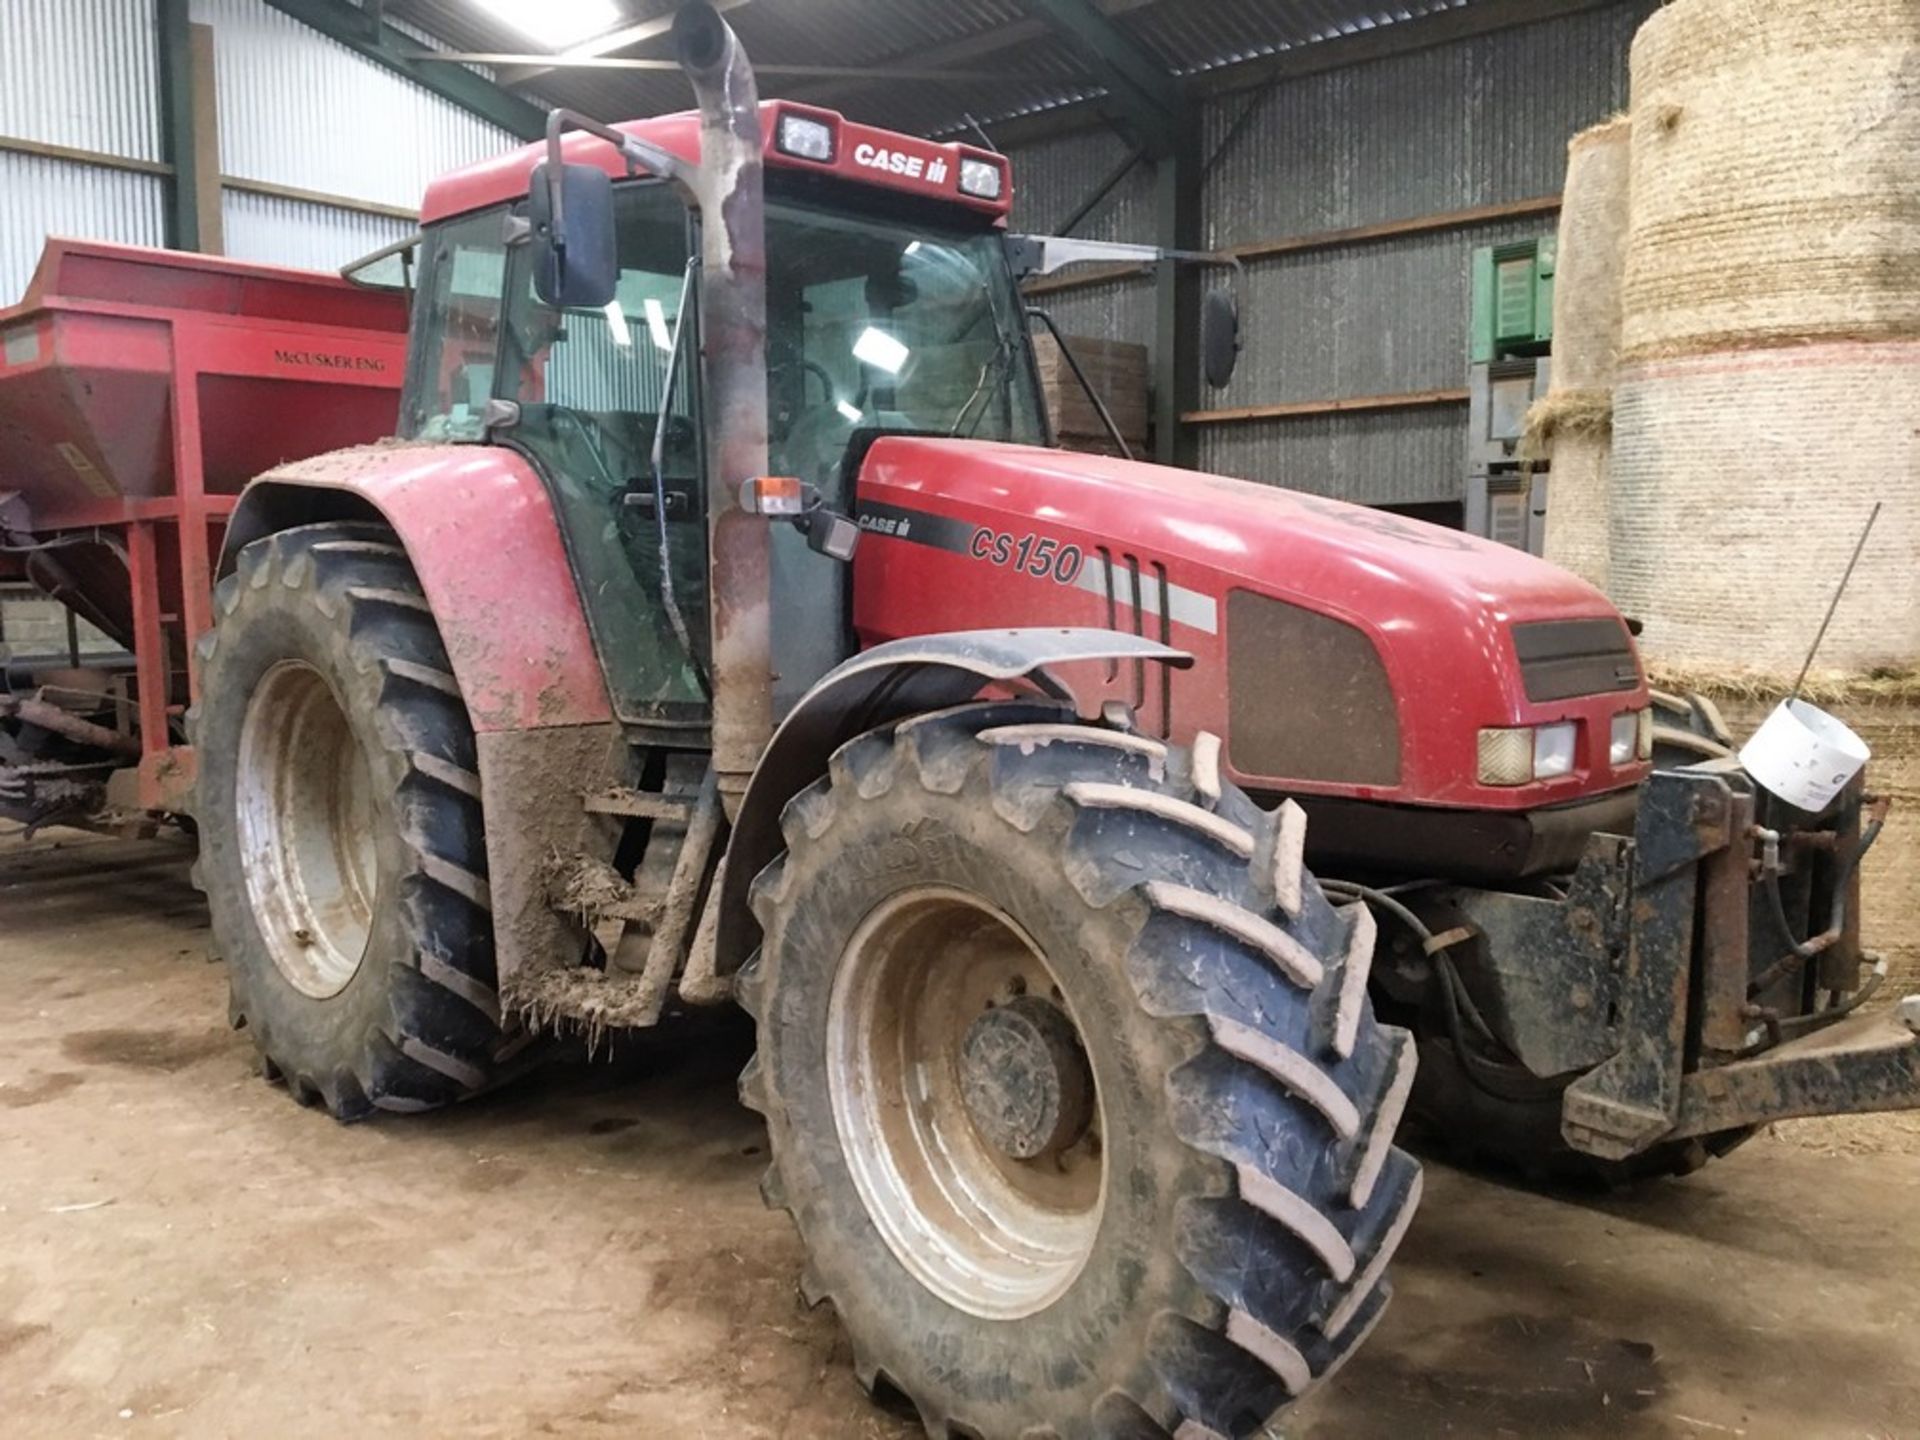 2002 CASE C150 4 wd tractor Reg No PX51 FDN 9340 hrs (not verified) - Image 2 of 15